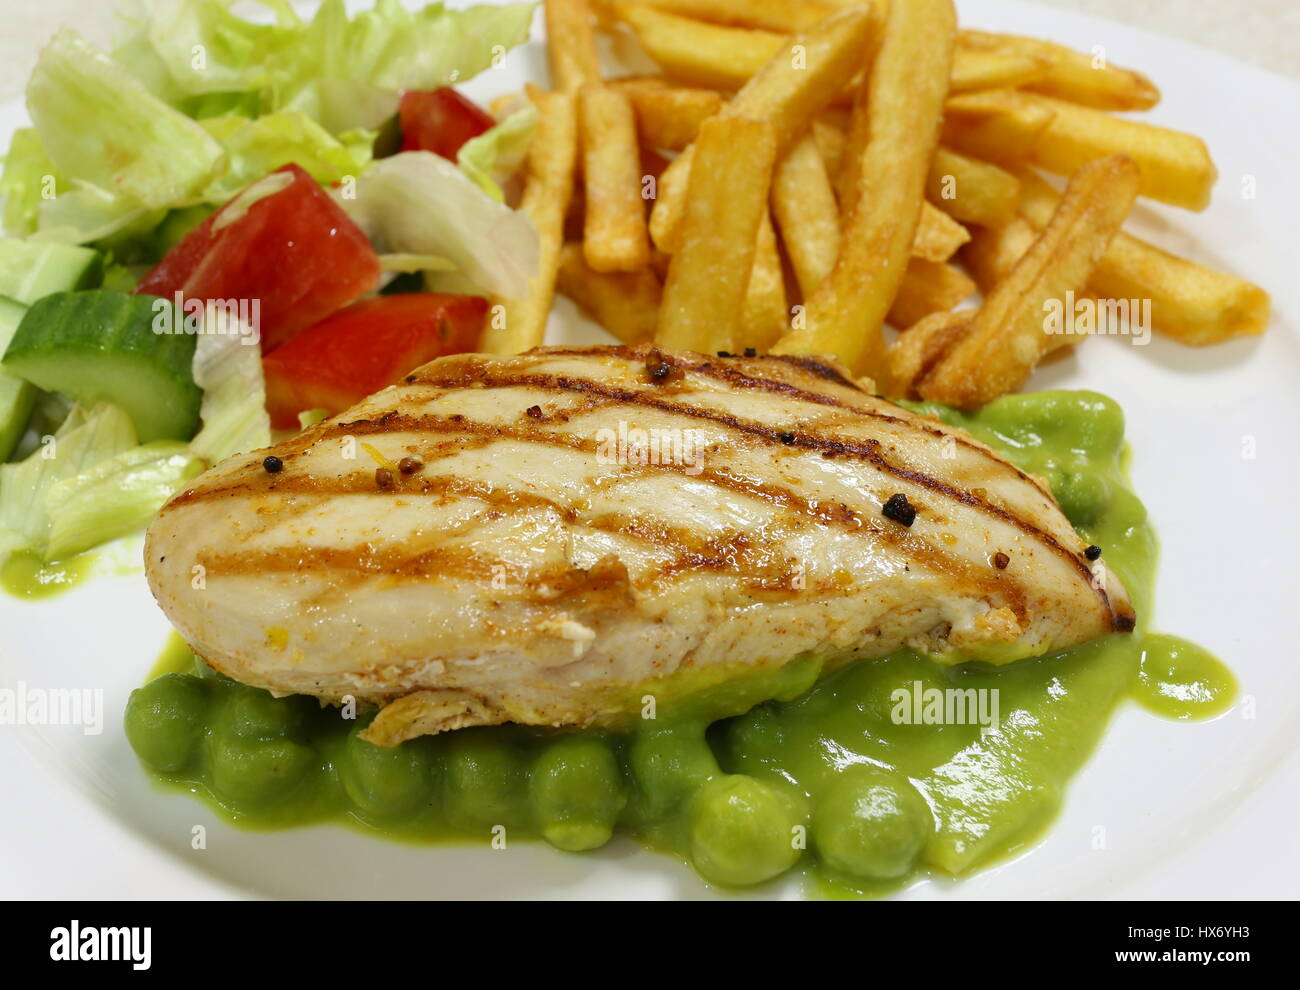 Grilled chicken breast on a bed of green pea puree and peas, served with a salad and french fried potato chips, side view Stock Photo